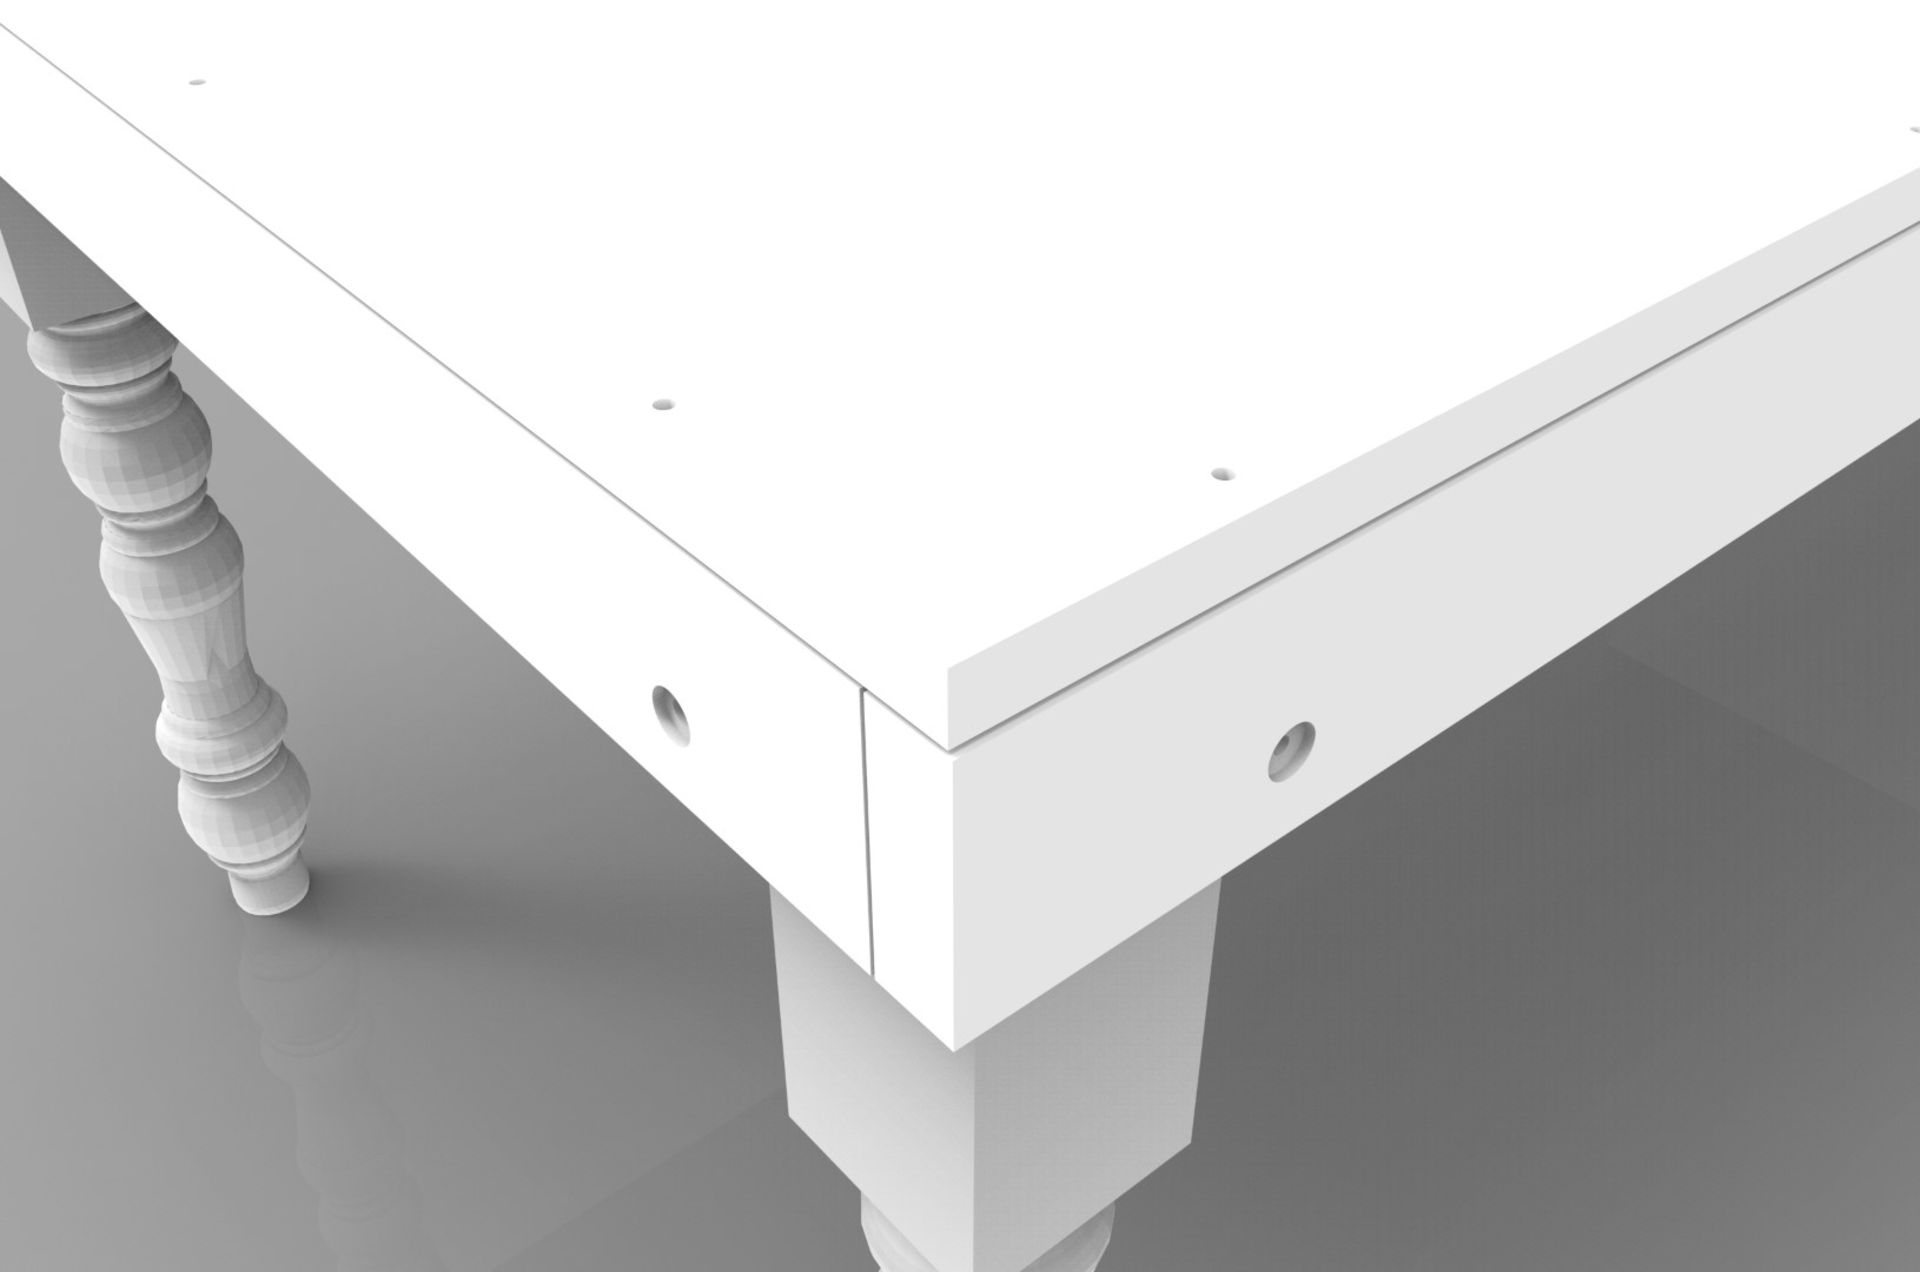 5 x Bespoke Rectangular Commercial Event / Dining Tables In White - Dimensions: 198cm x D99 x H74cm - Image 4 of 5